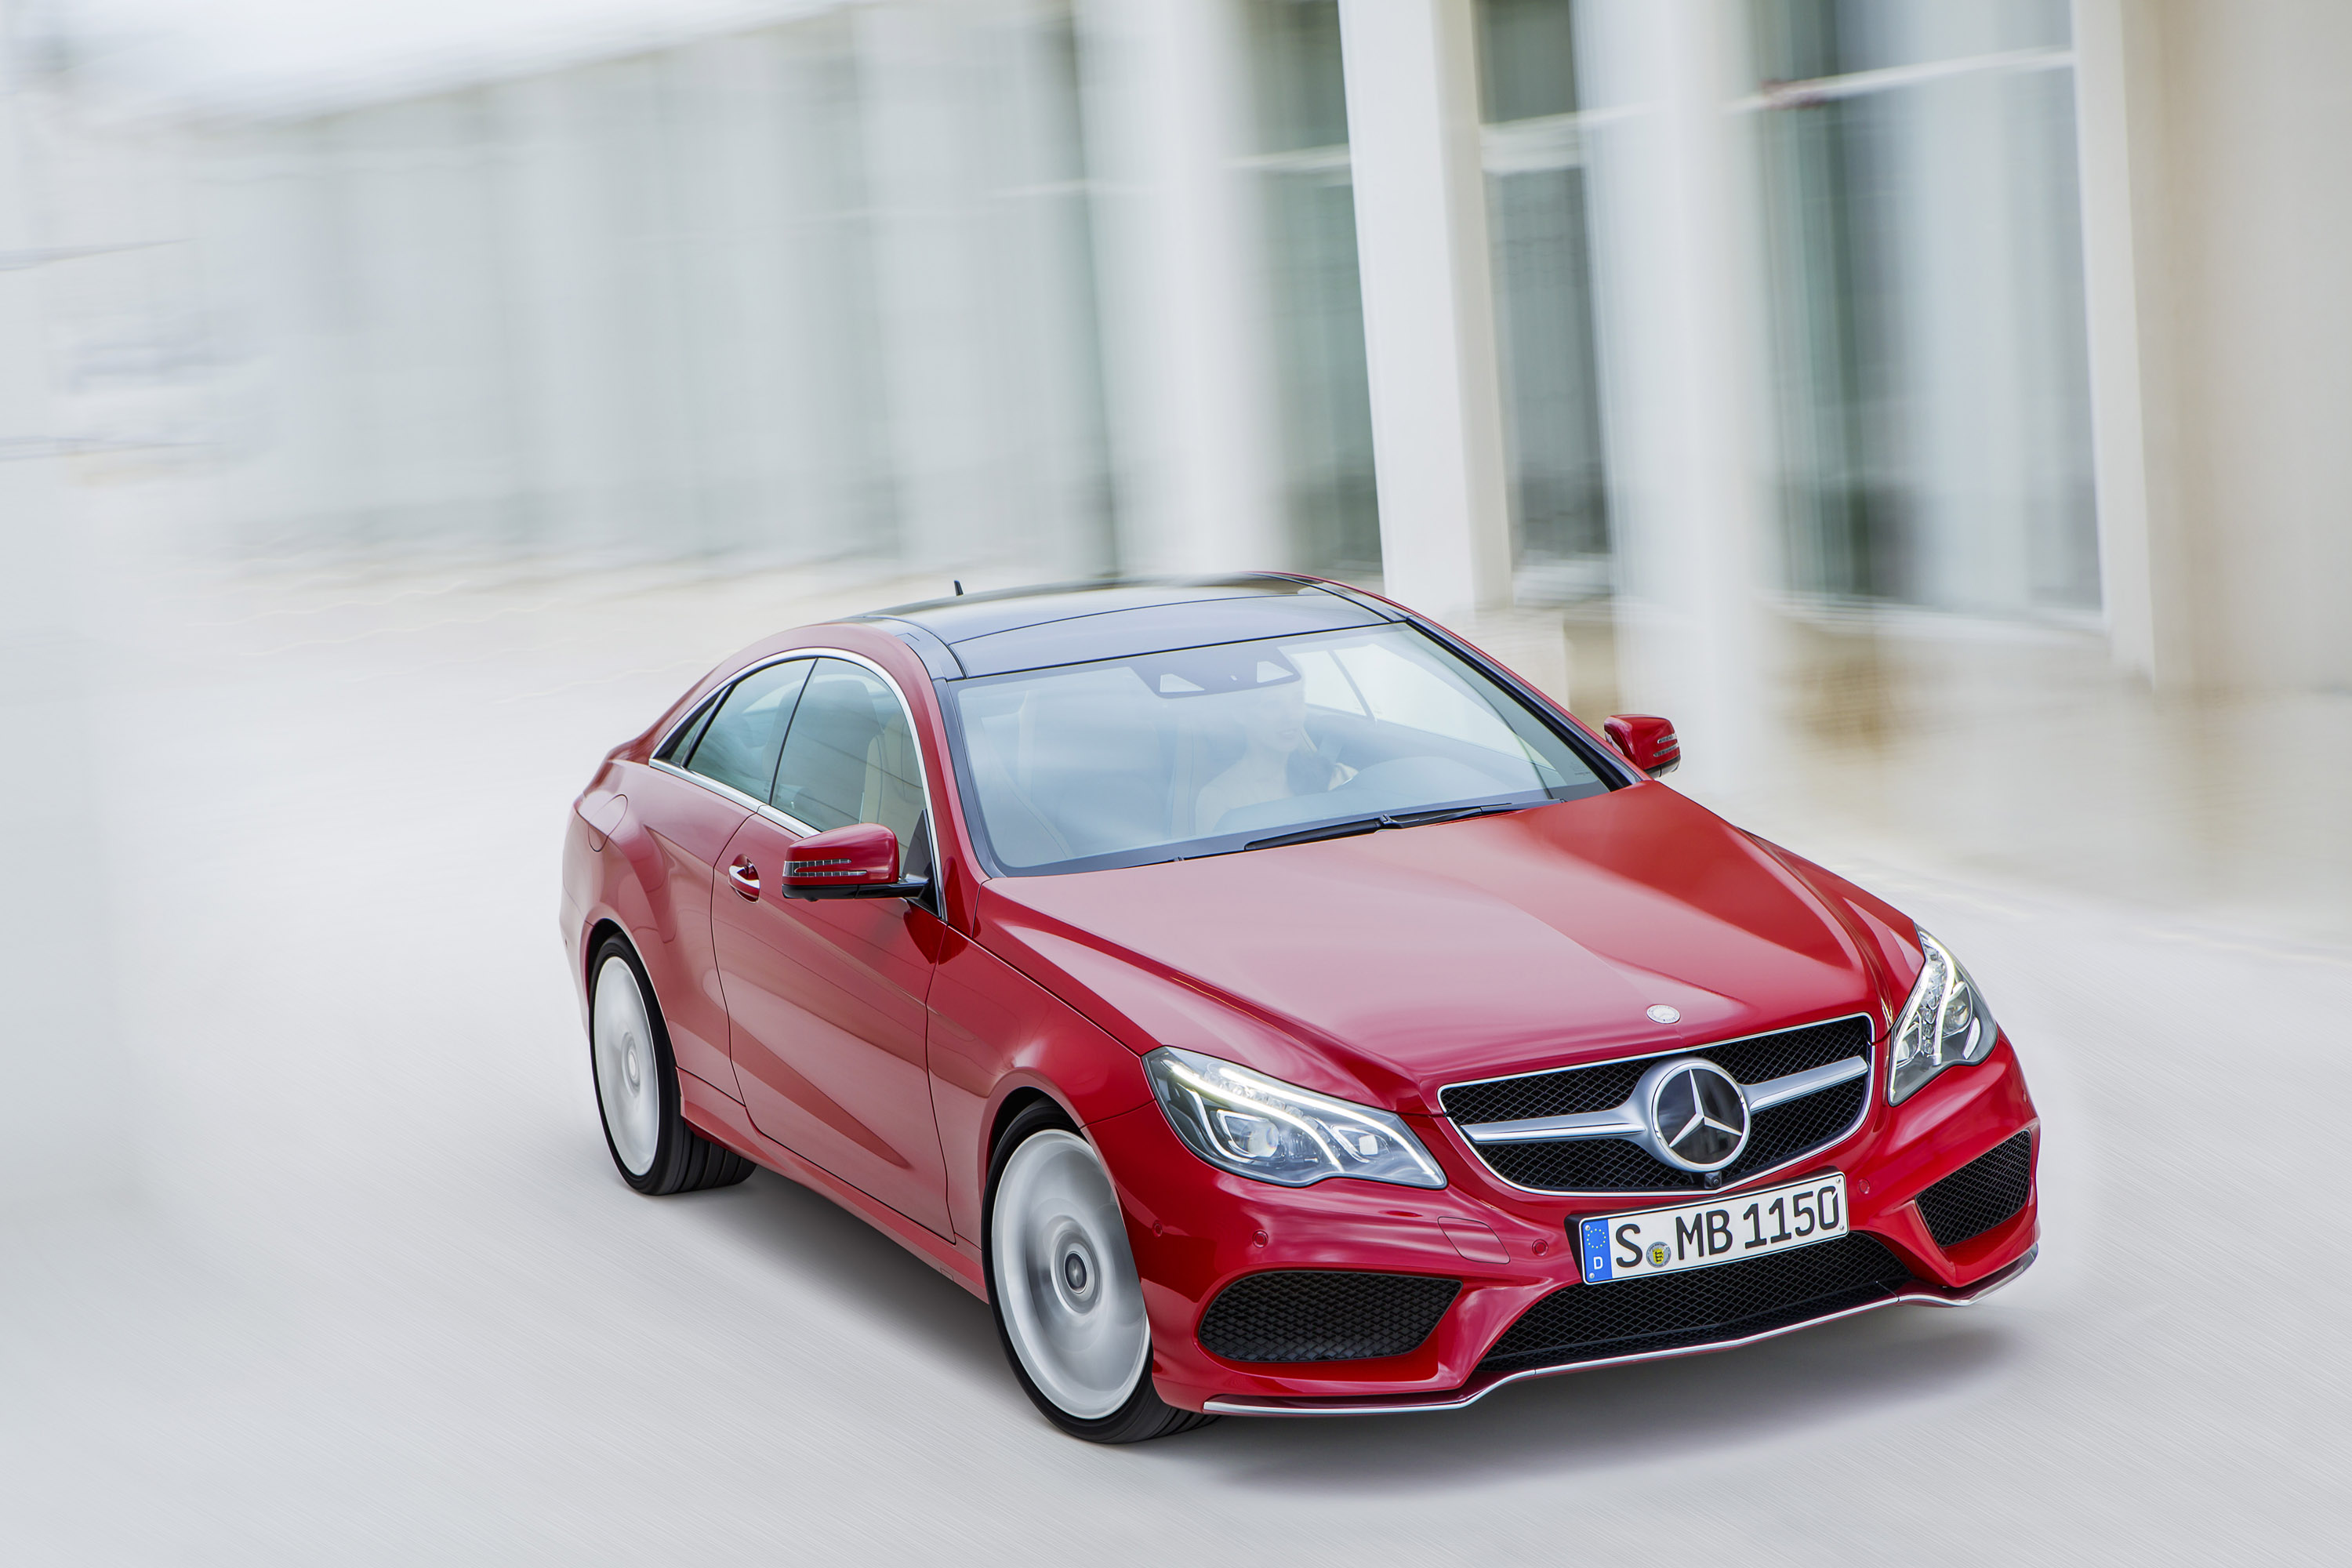 Mercedes-Benz E-Class Coupe and Cabriolet photo #1